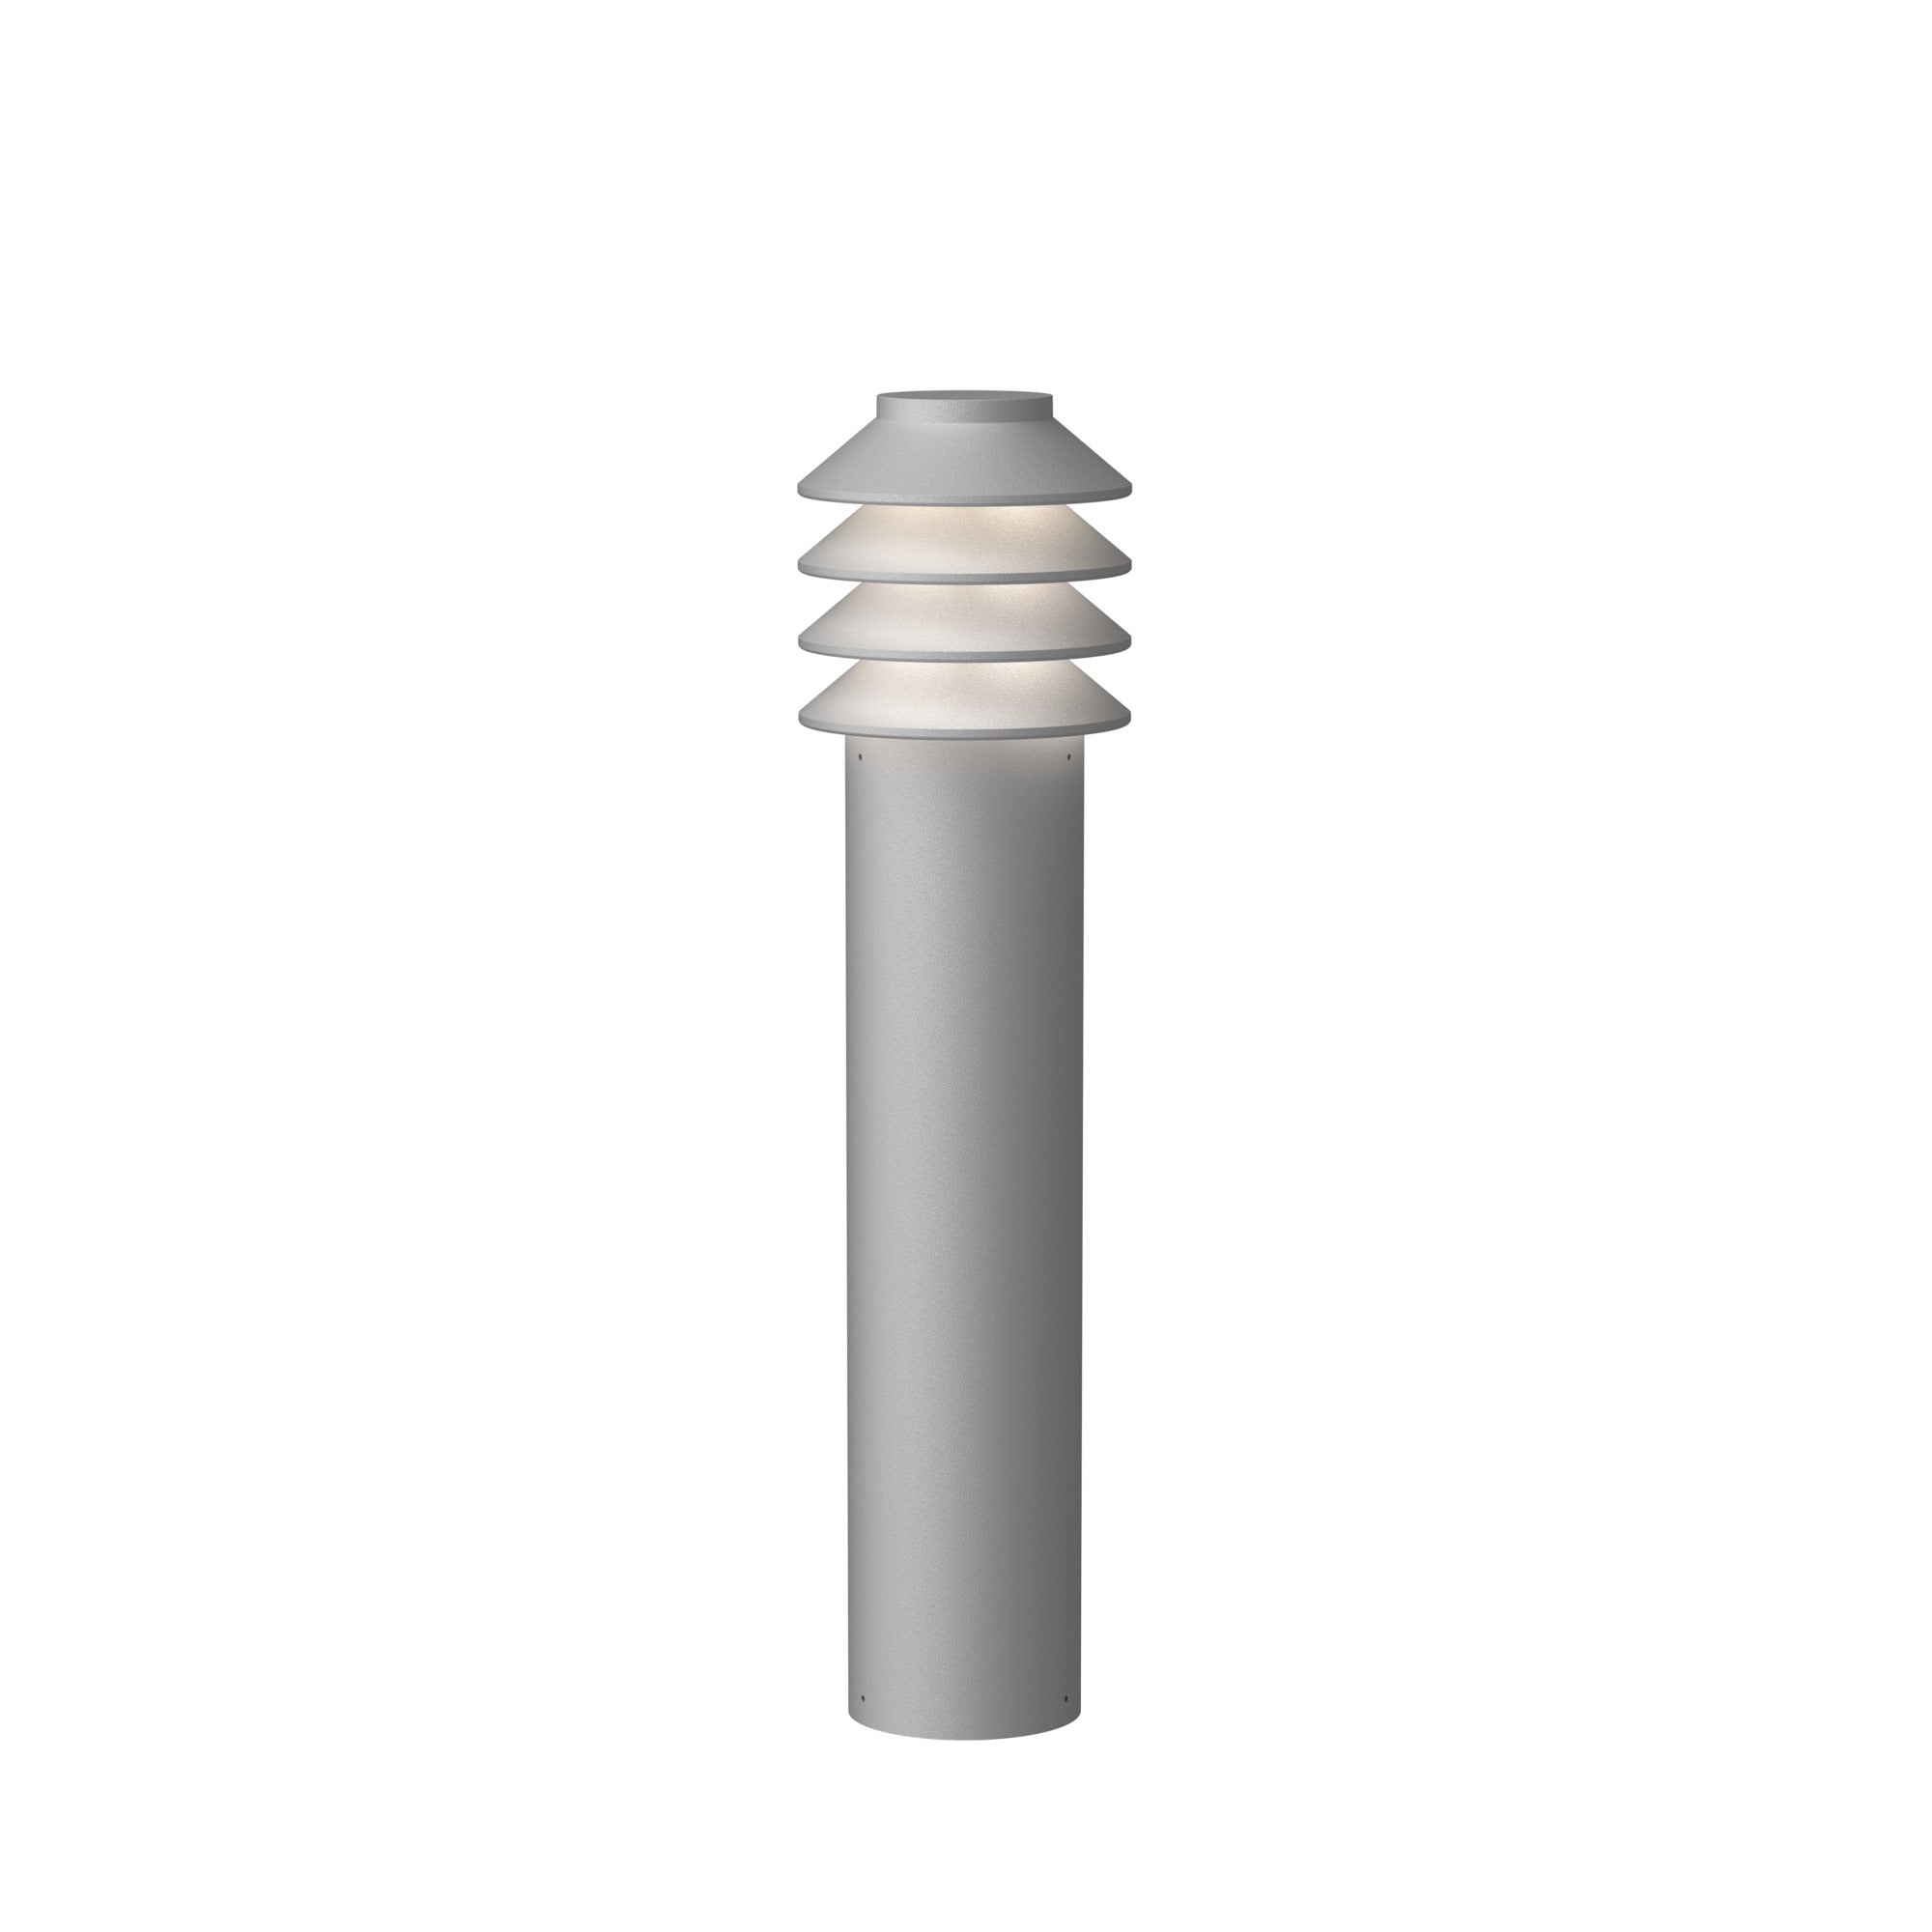 Louis Poulsen Bysted Garden Bollard Lamp Large Aluminium Led 3000 K With Base Plate O/Adapter